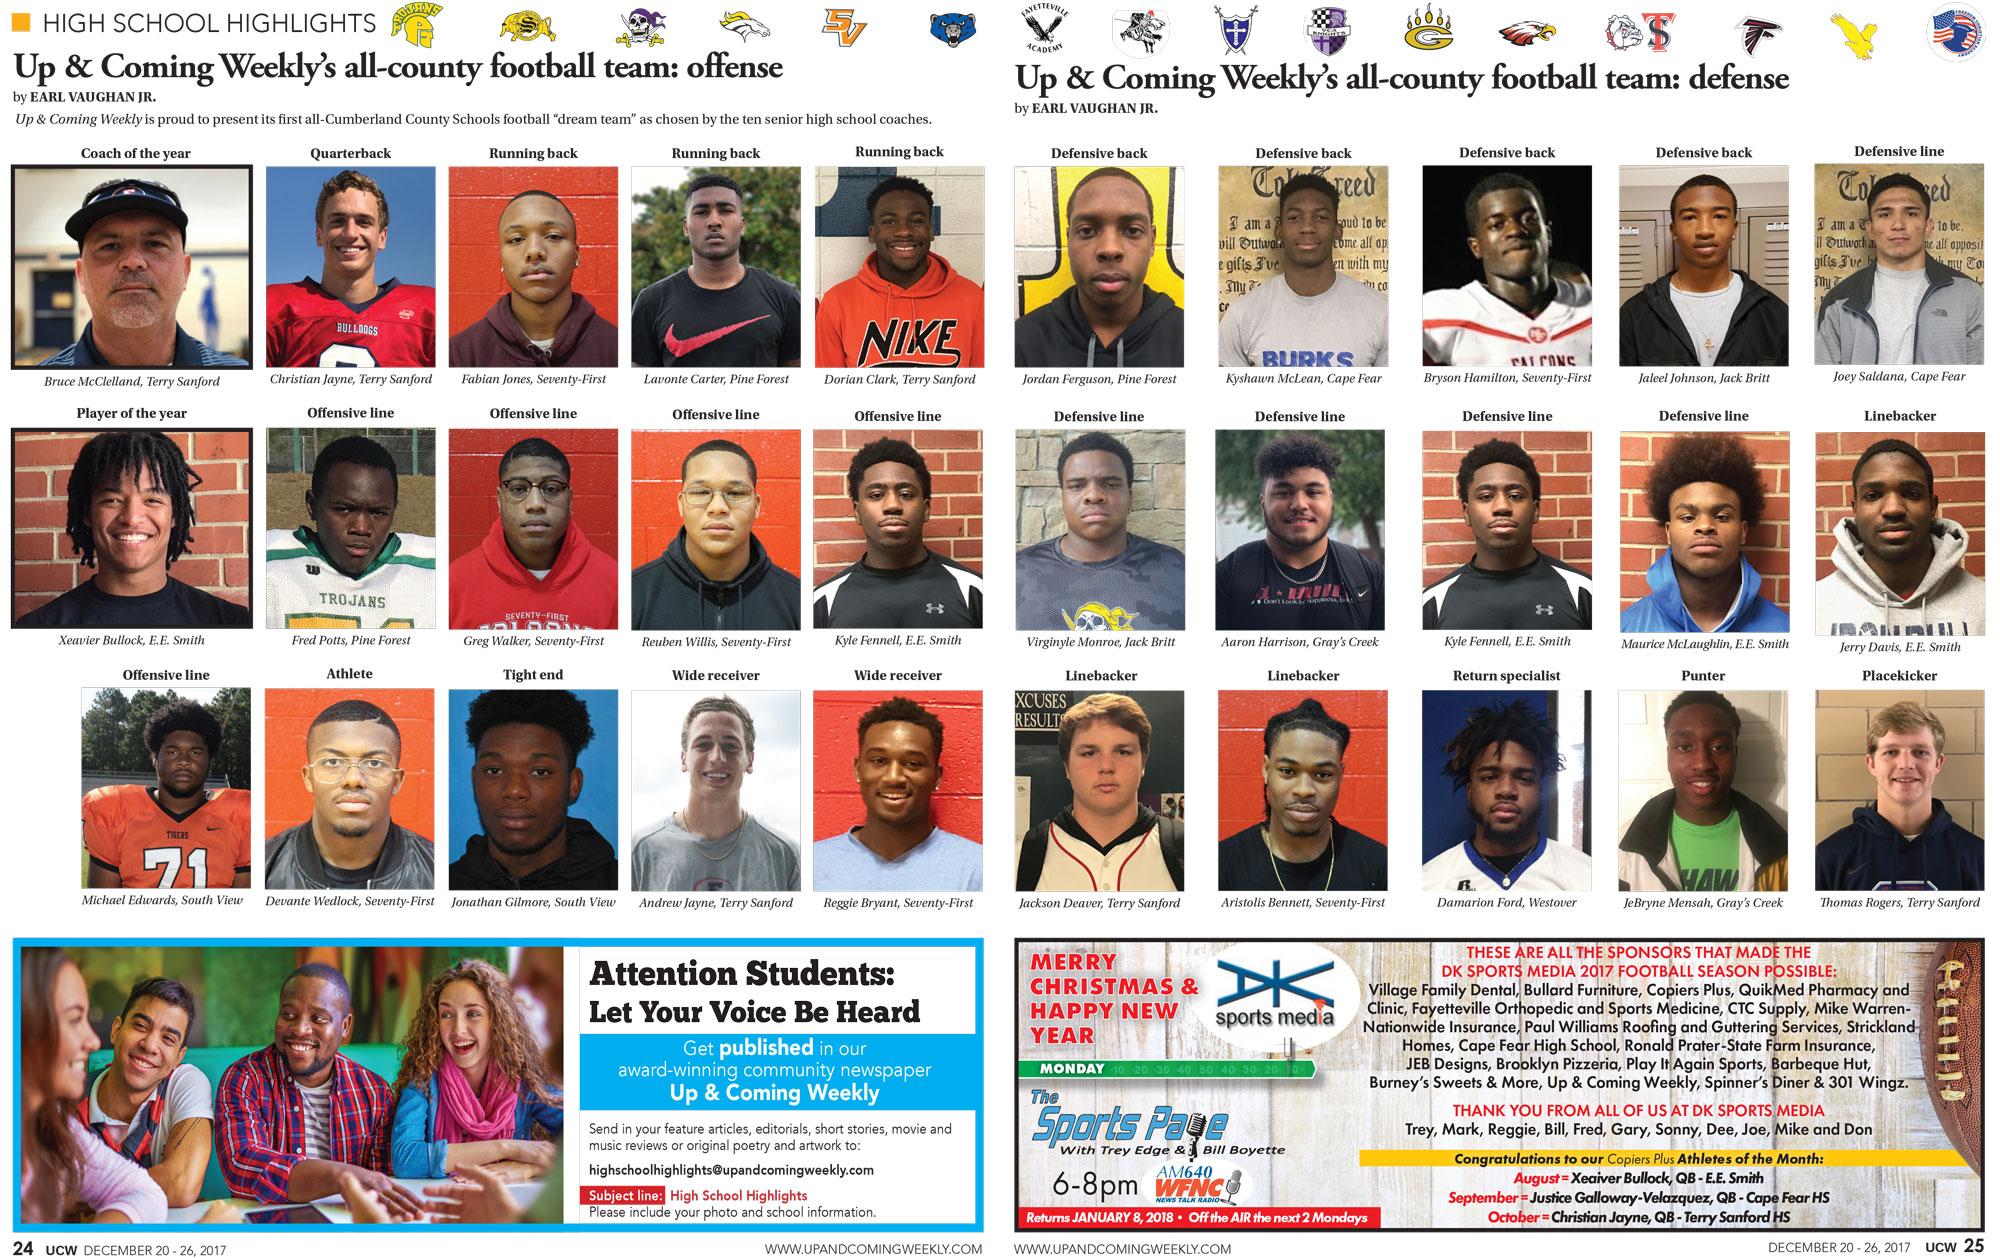 12 All county team story